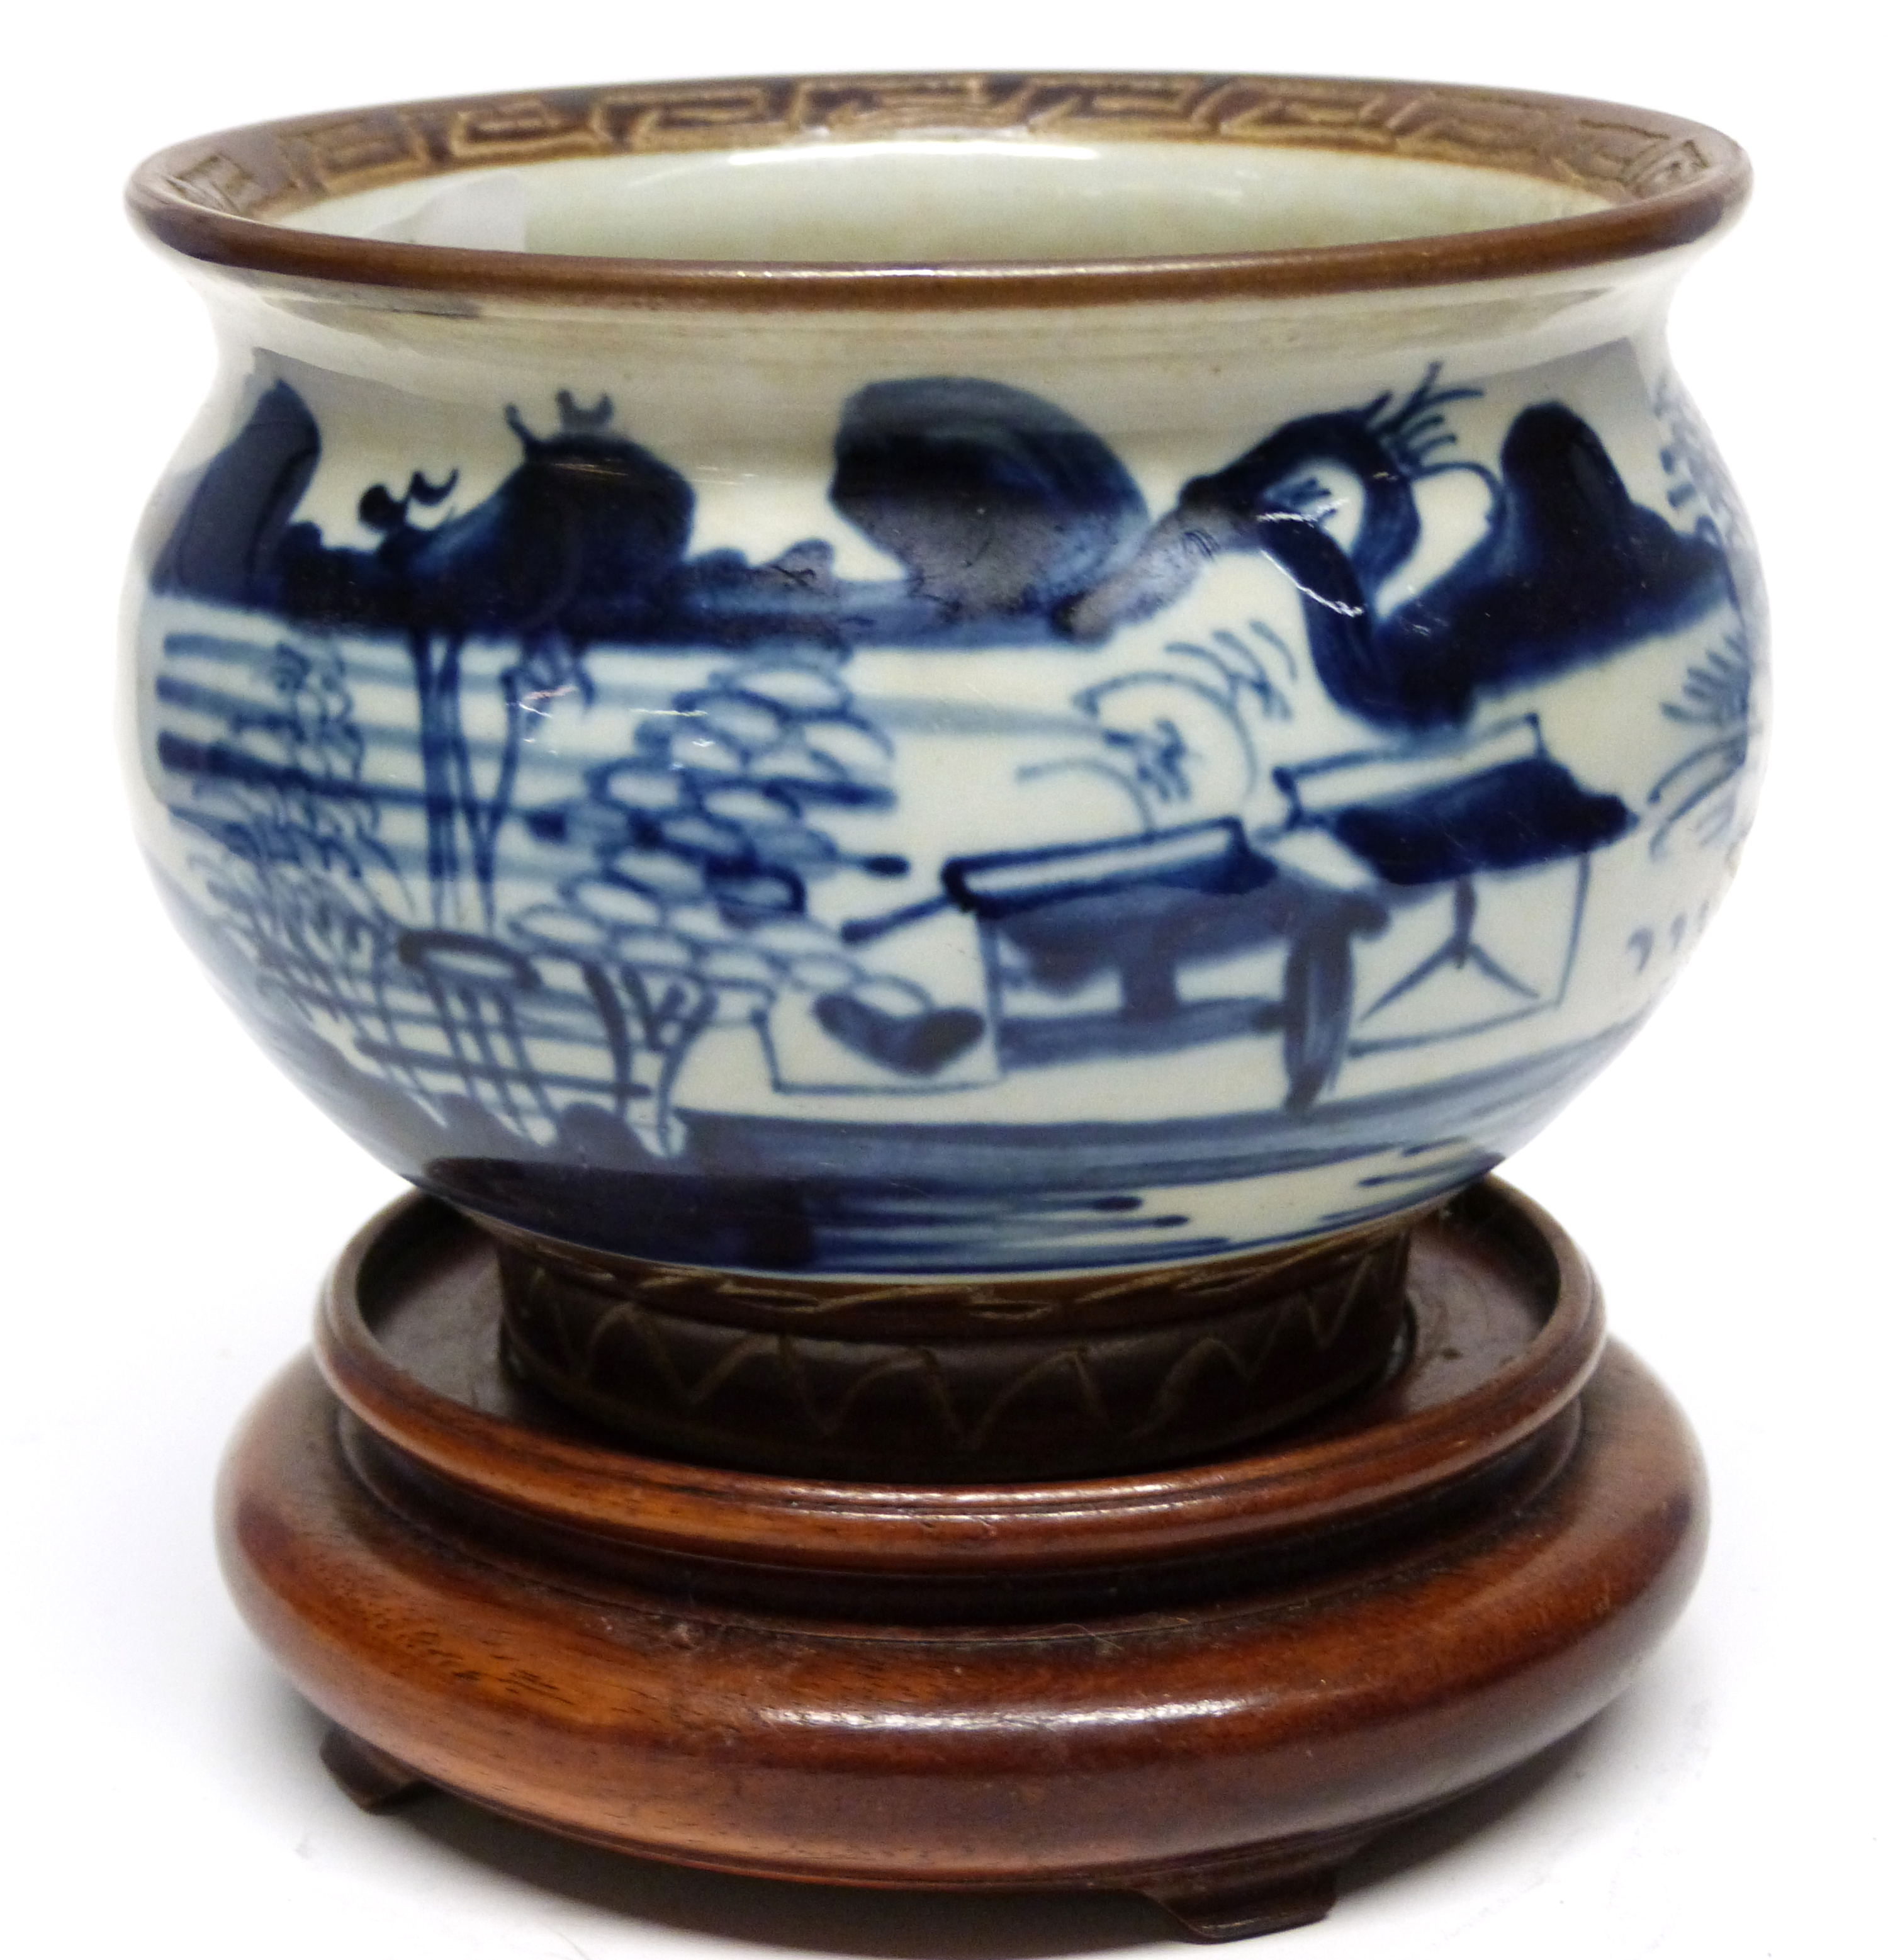 Batavia style porcelain bowl with a blue and white design within a brown glazed border, 13cm diam